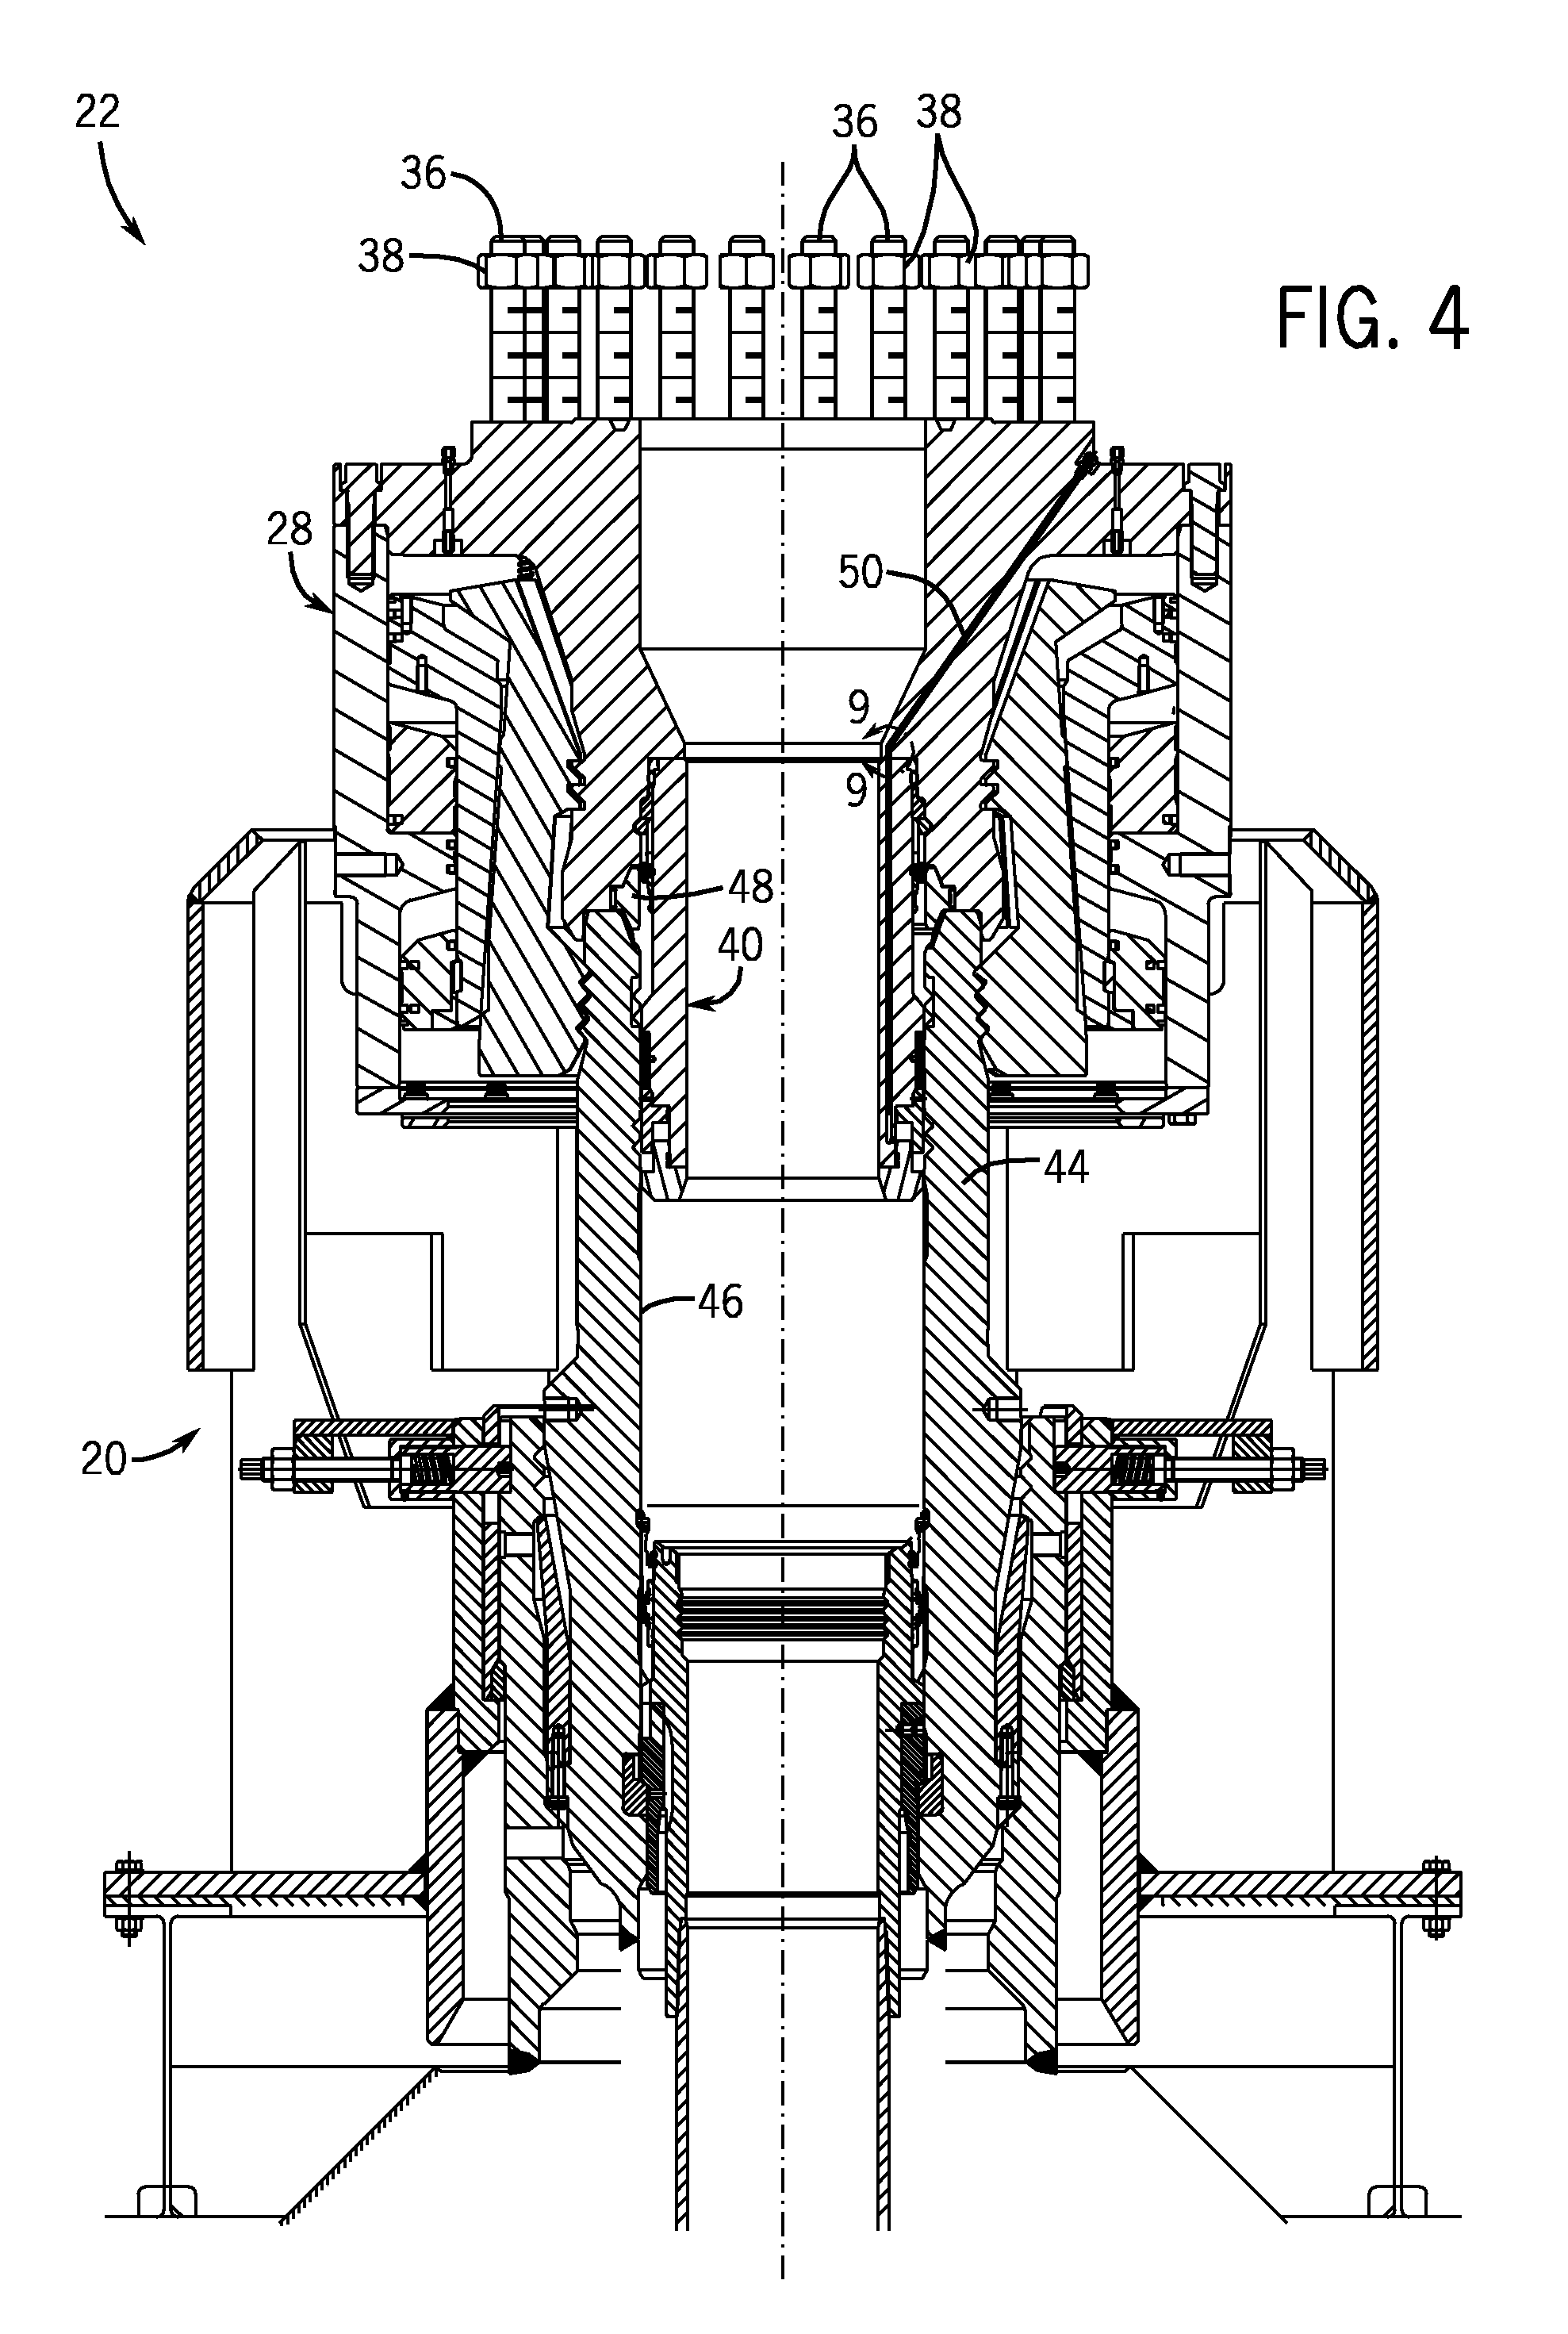 Sealing mechanism for subsea capping system